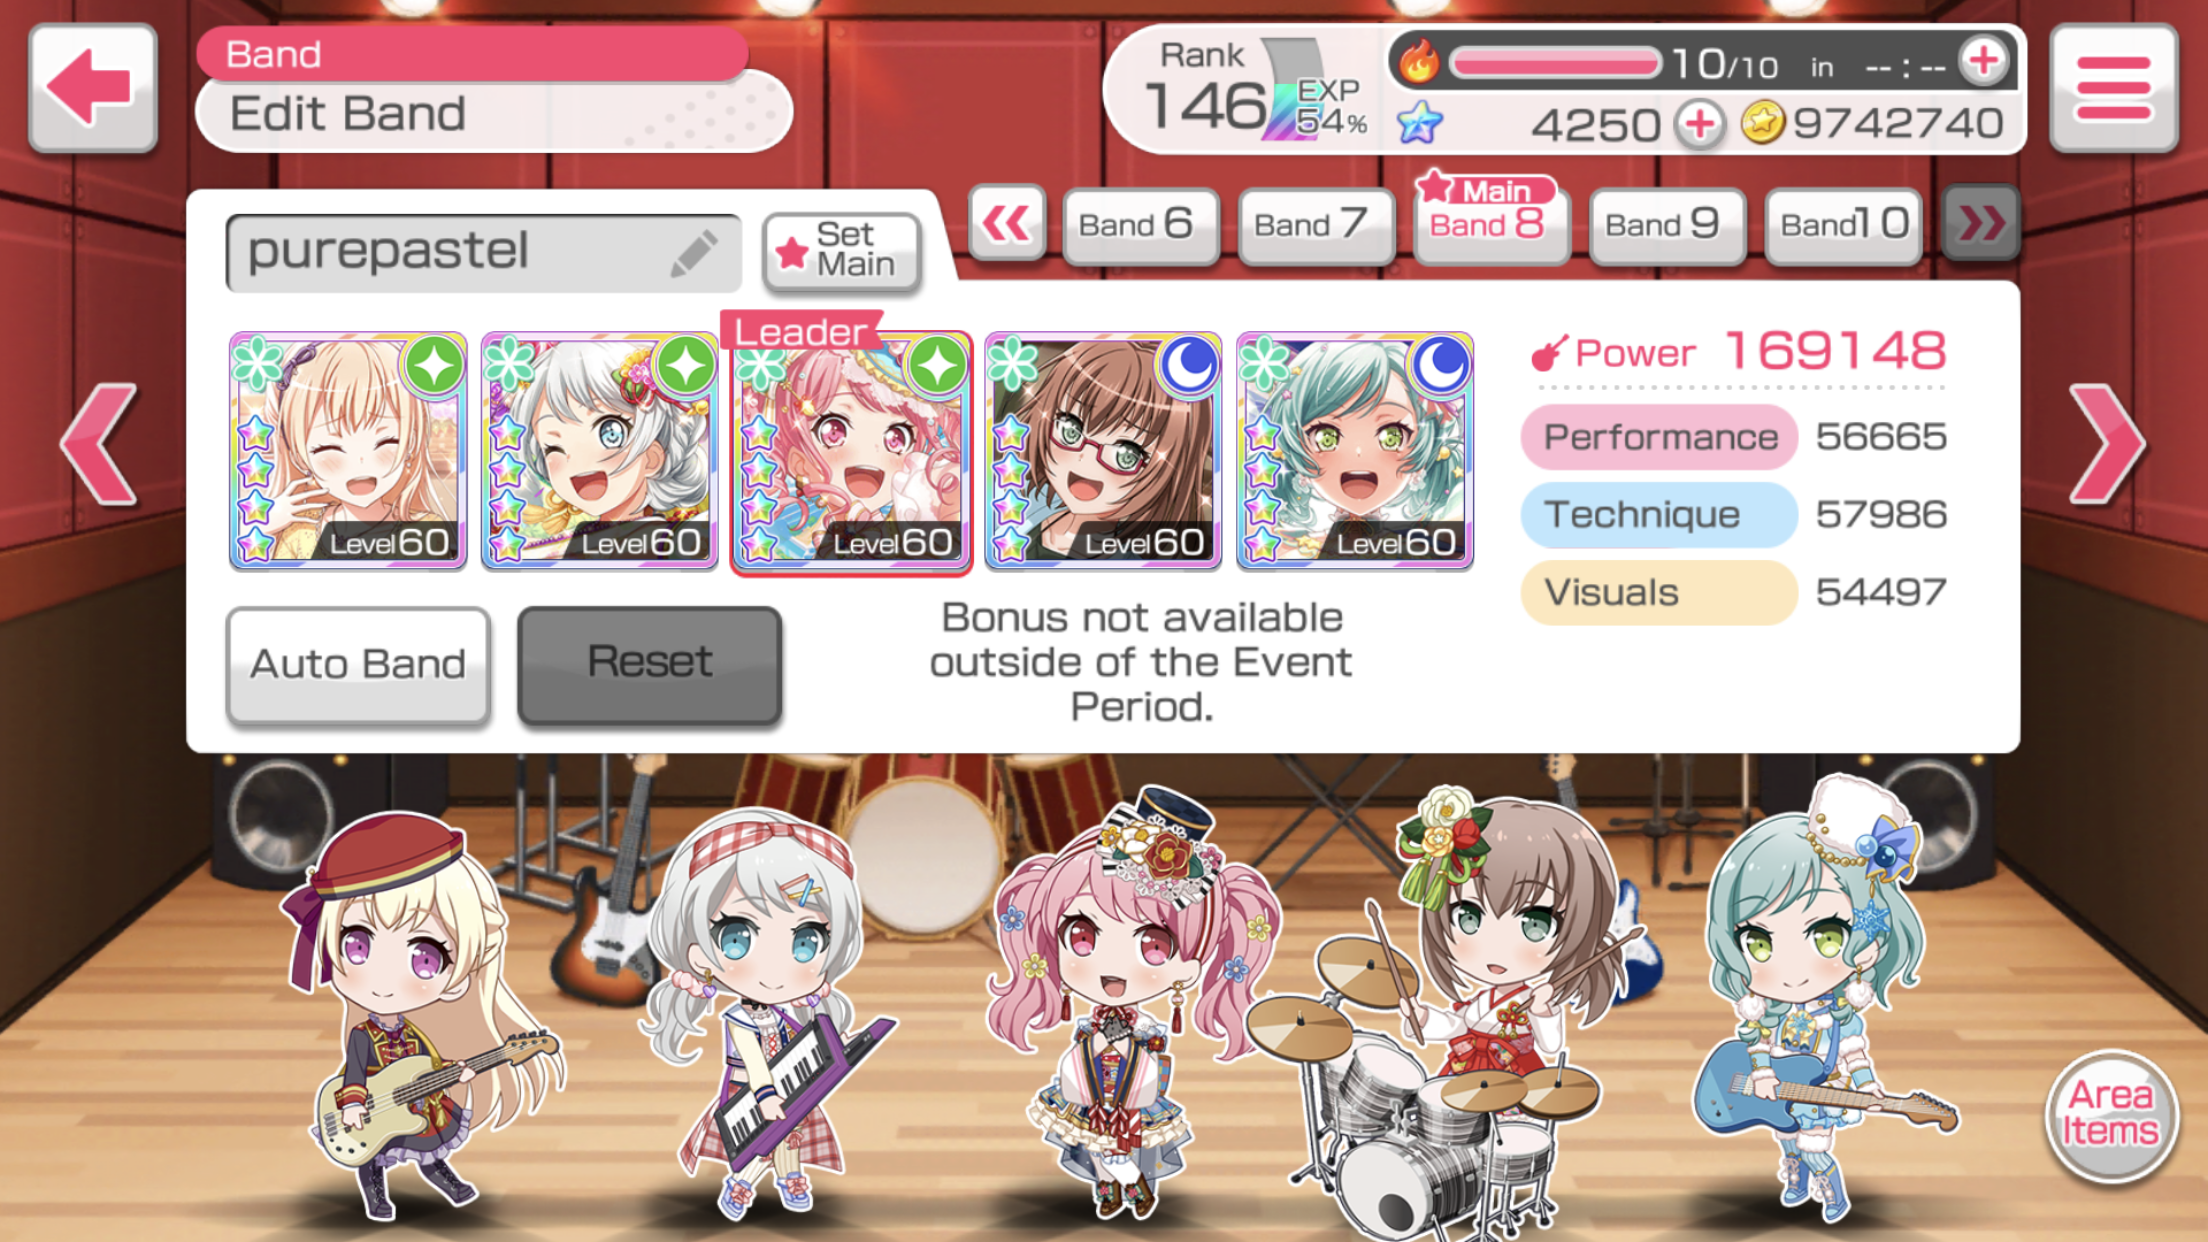 Bandori Confessions! — I love getting a high ranking during events, but